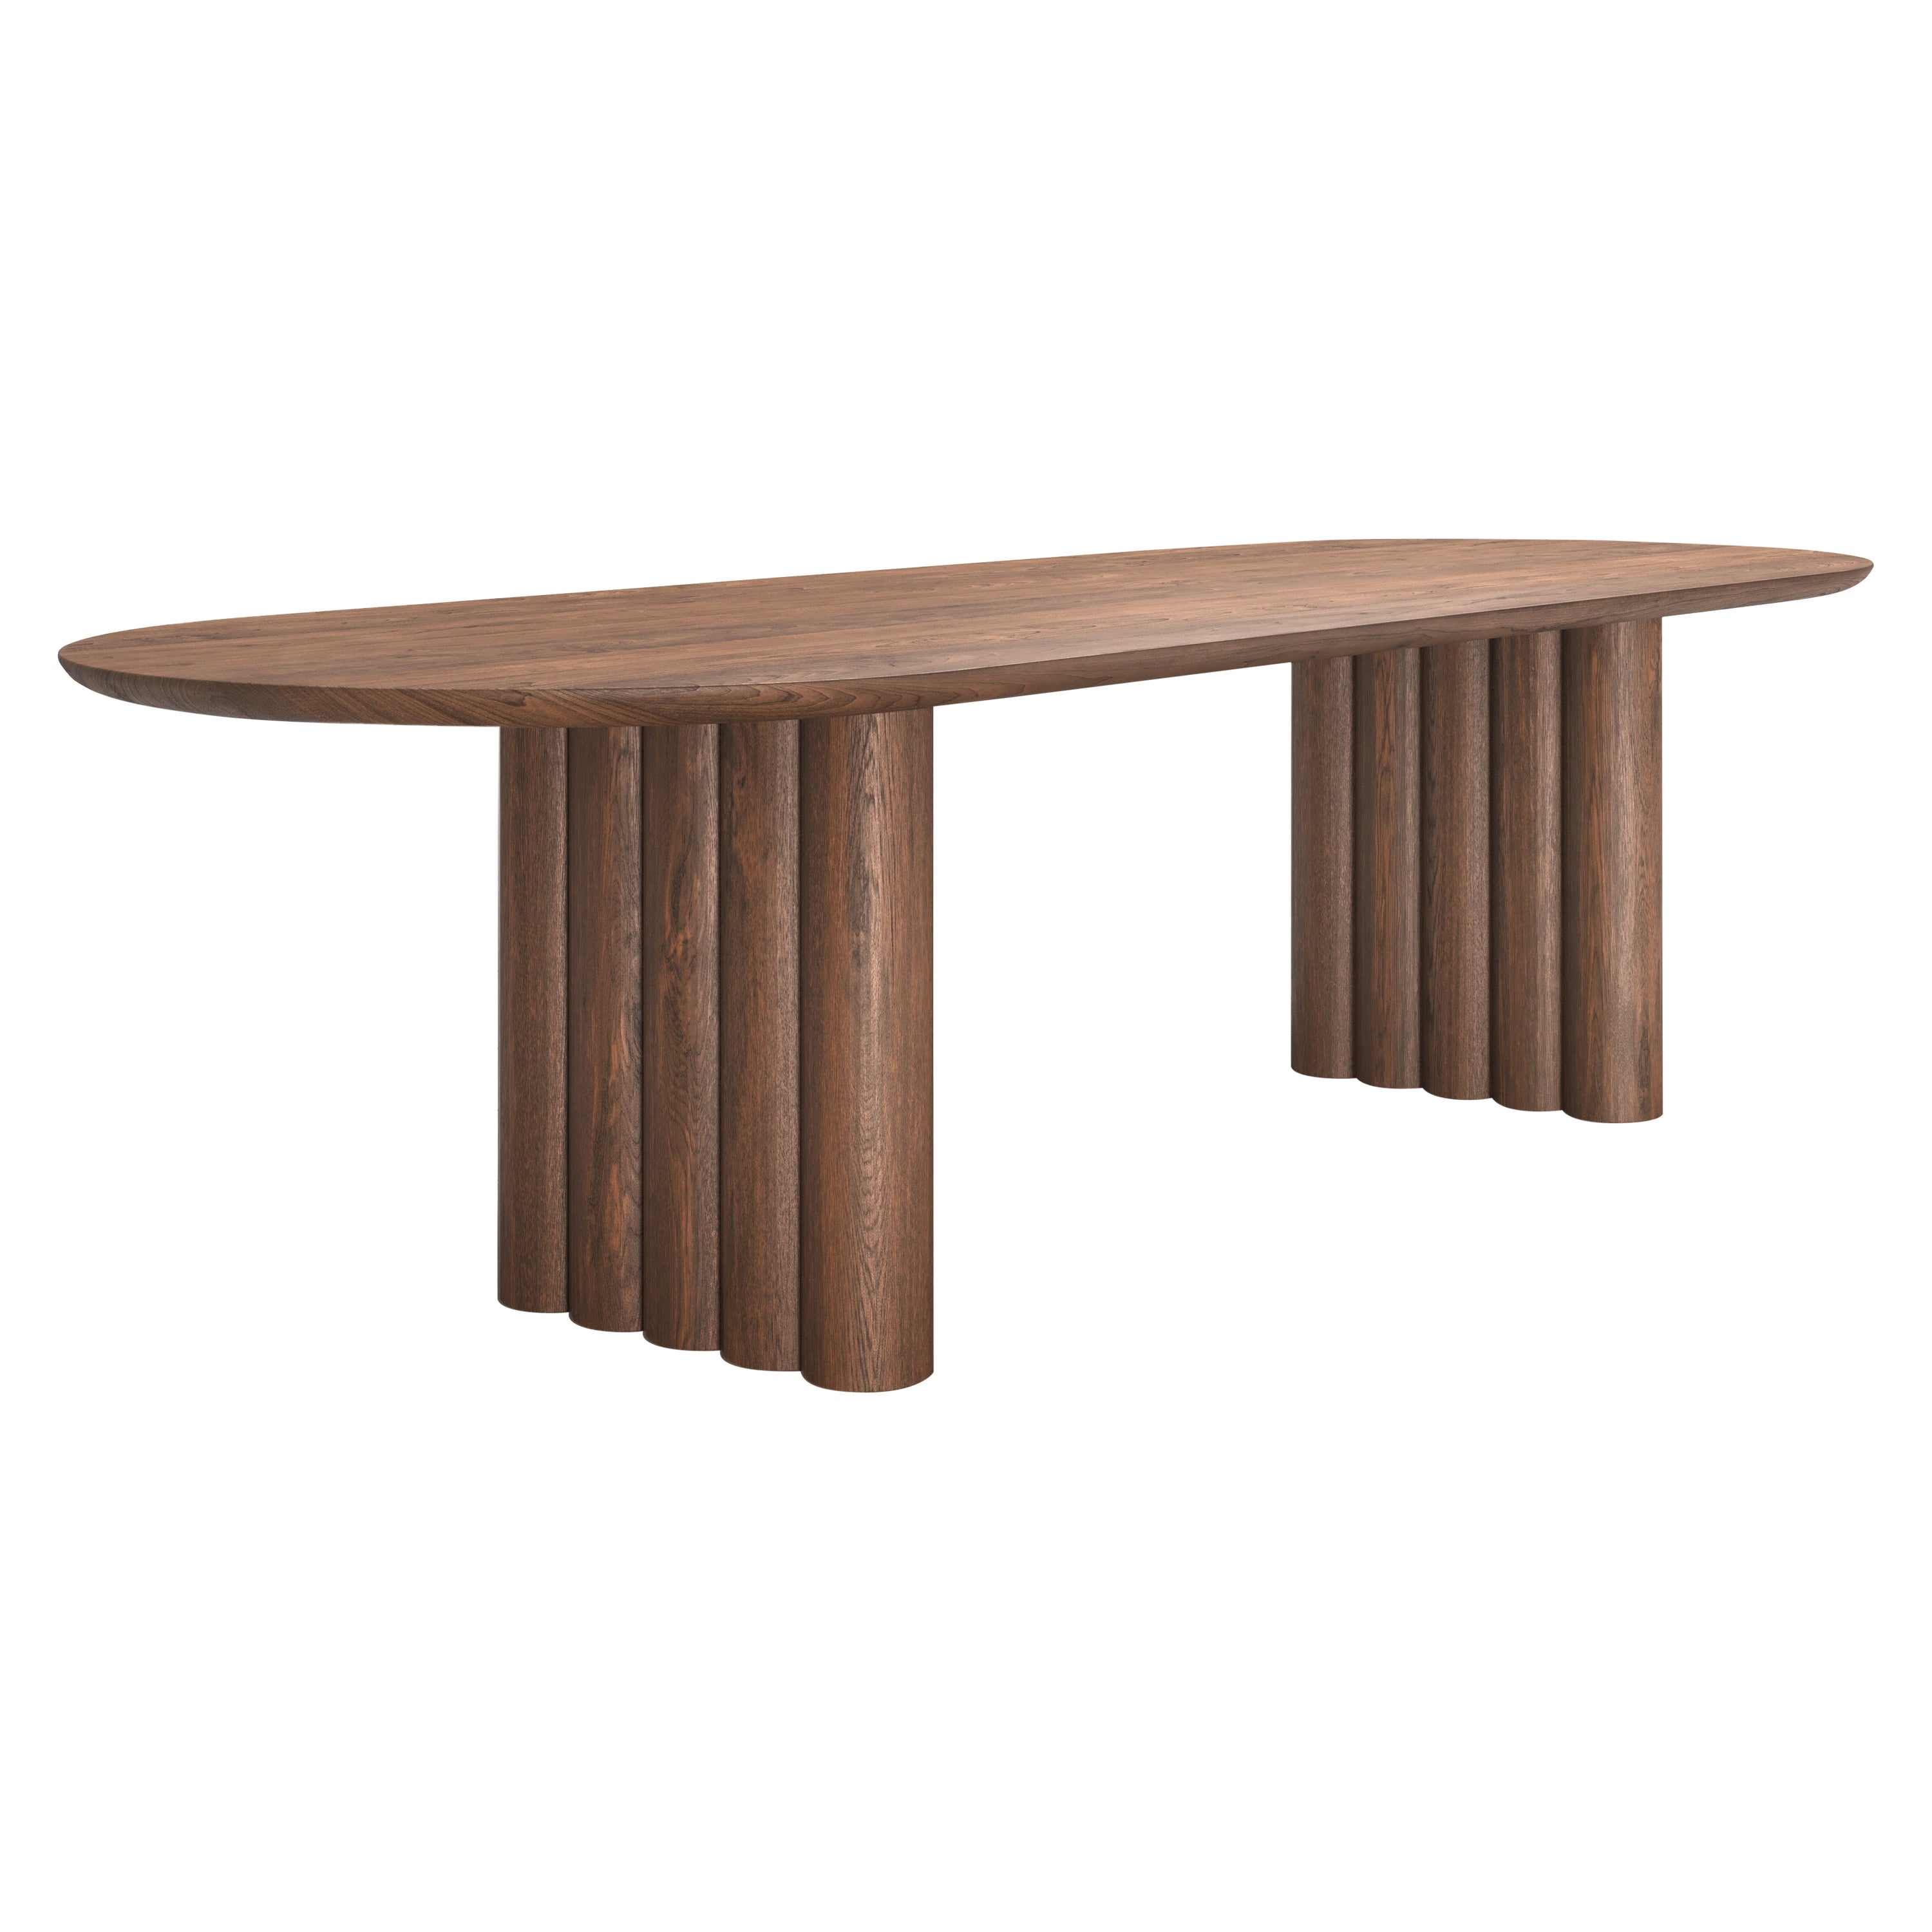 Contemporary Dining Table 'Plush' by Dk3, Smoked Oak or Walnut, 240